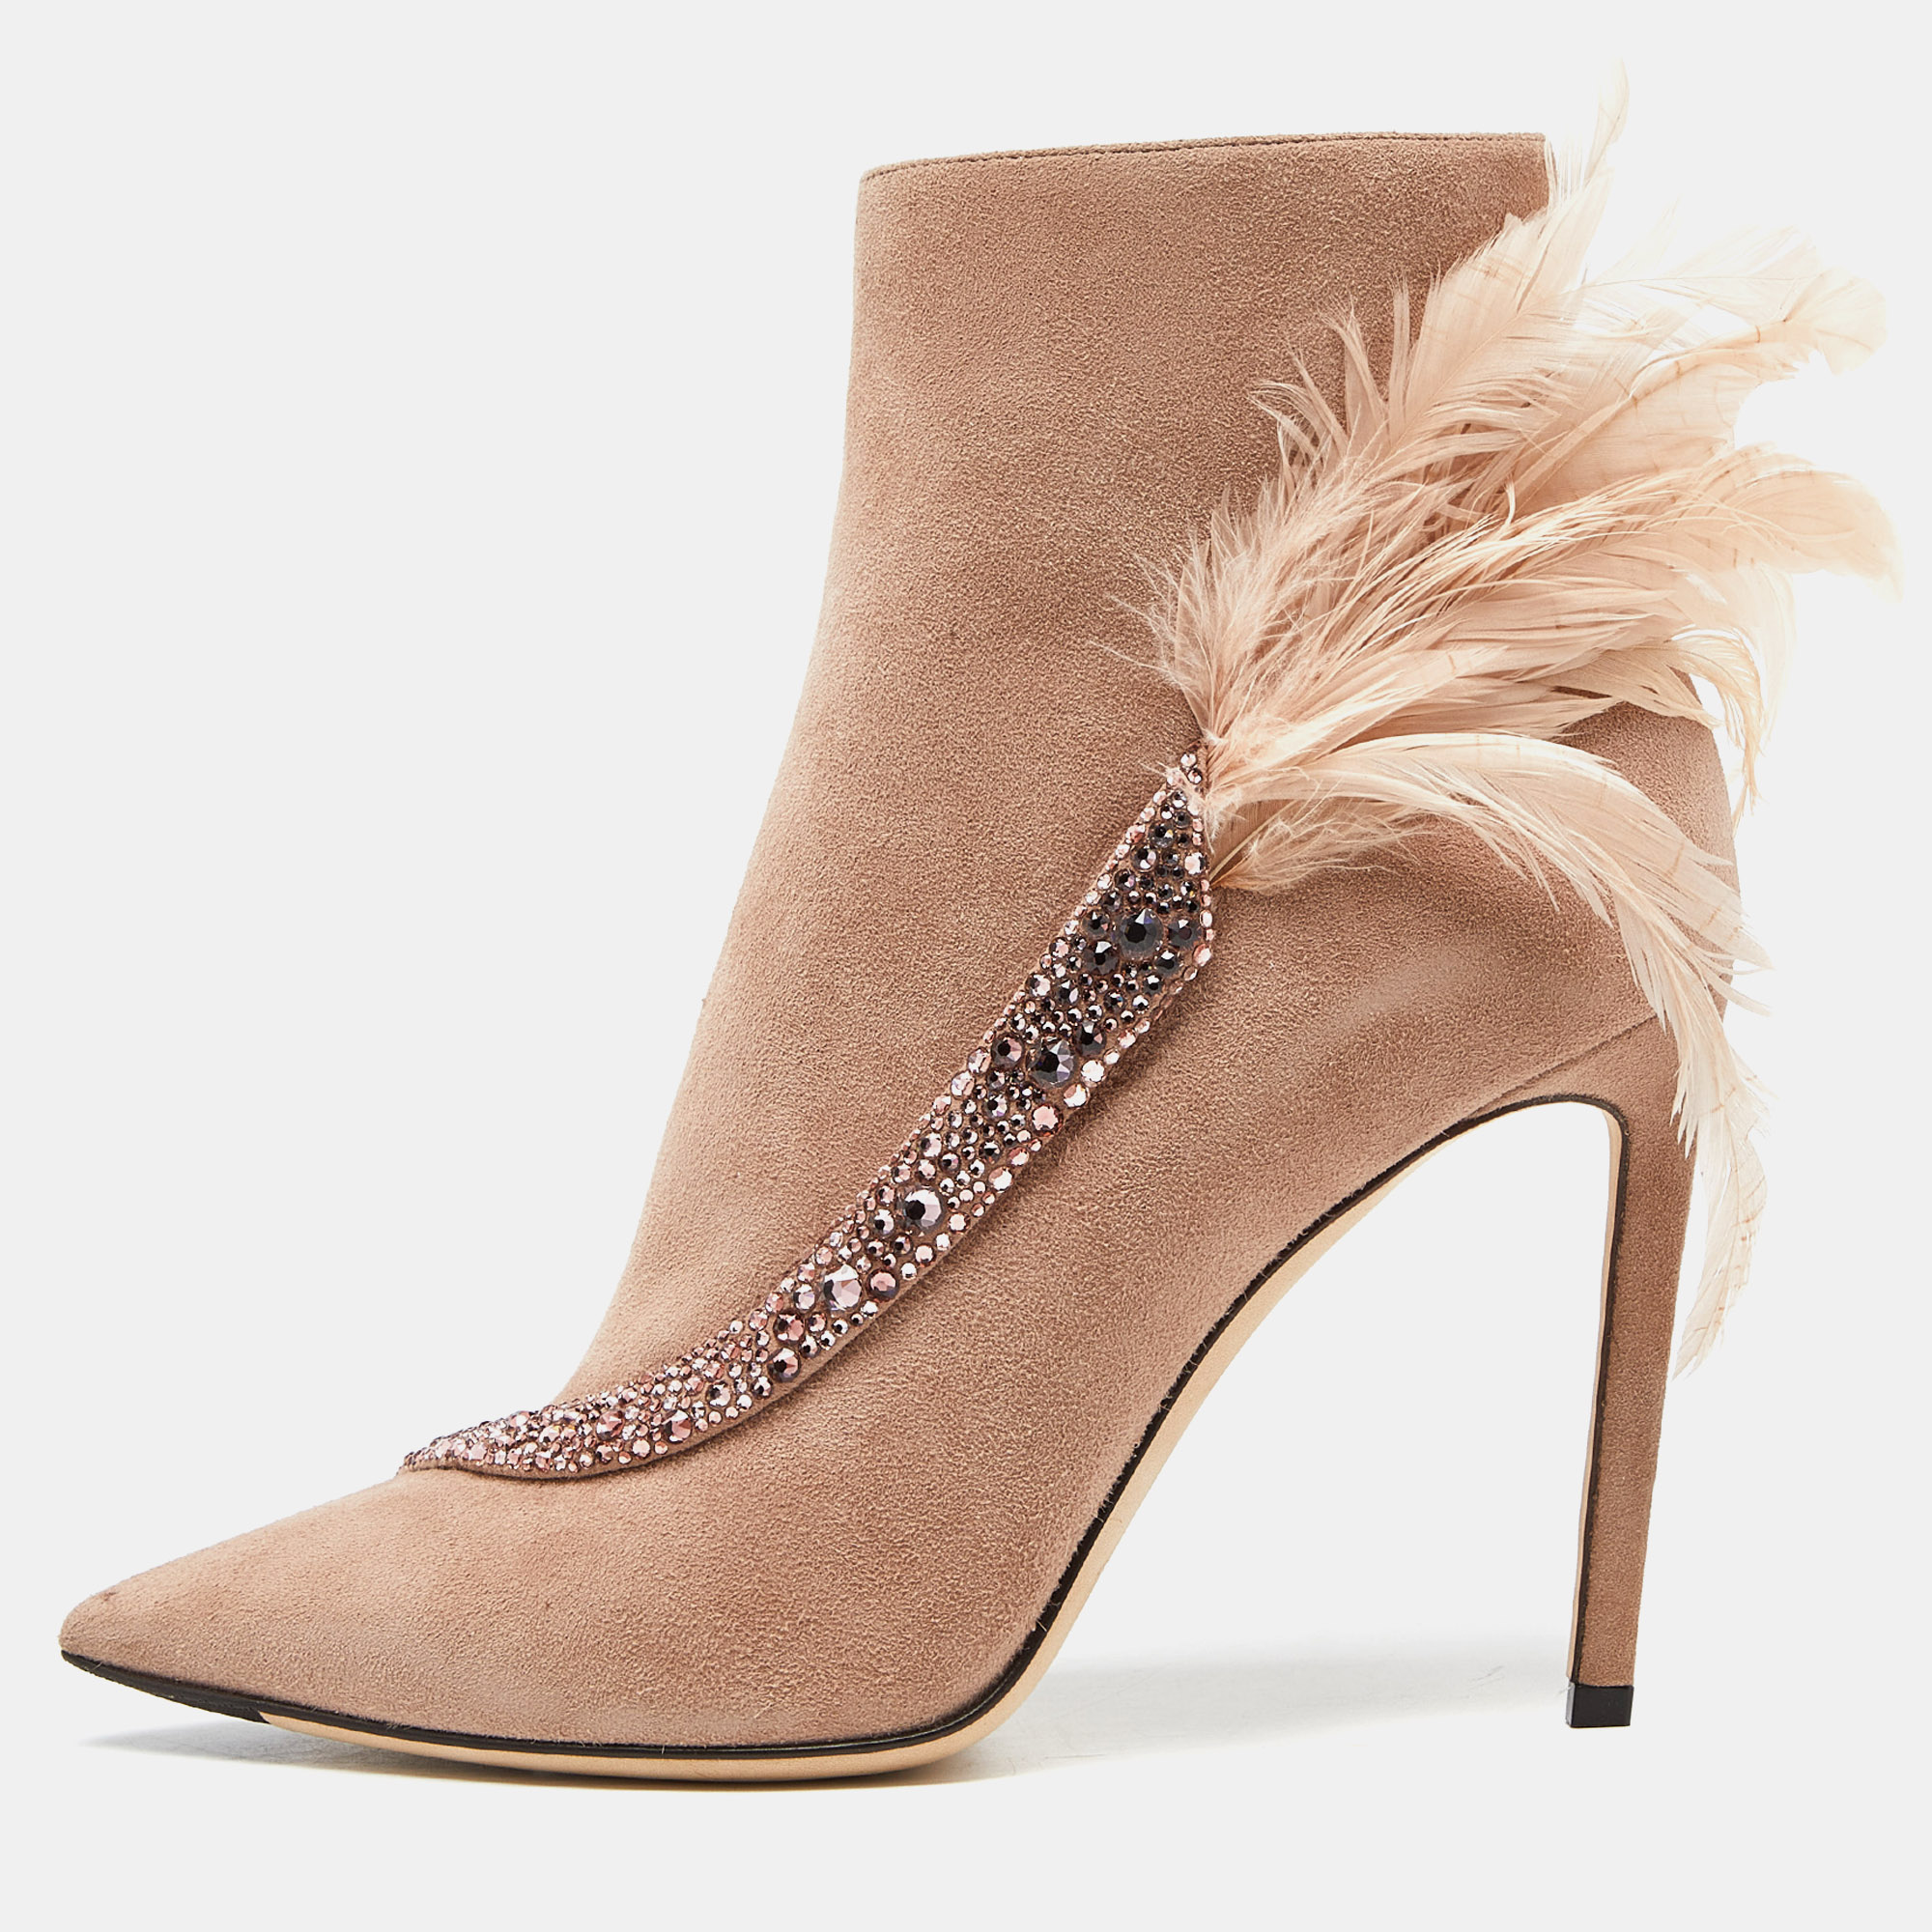 Jimmy choo pink suede and feather crystal embellished ankle boots size 39